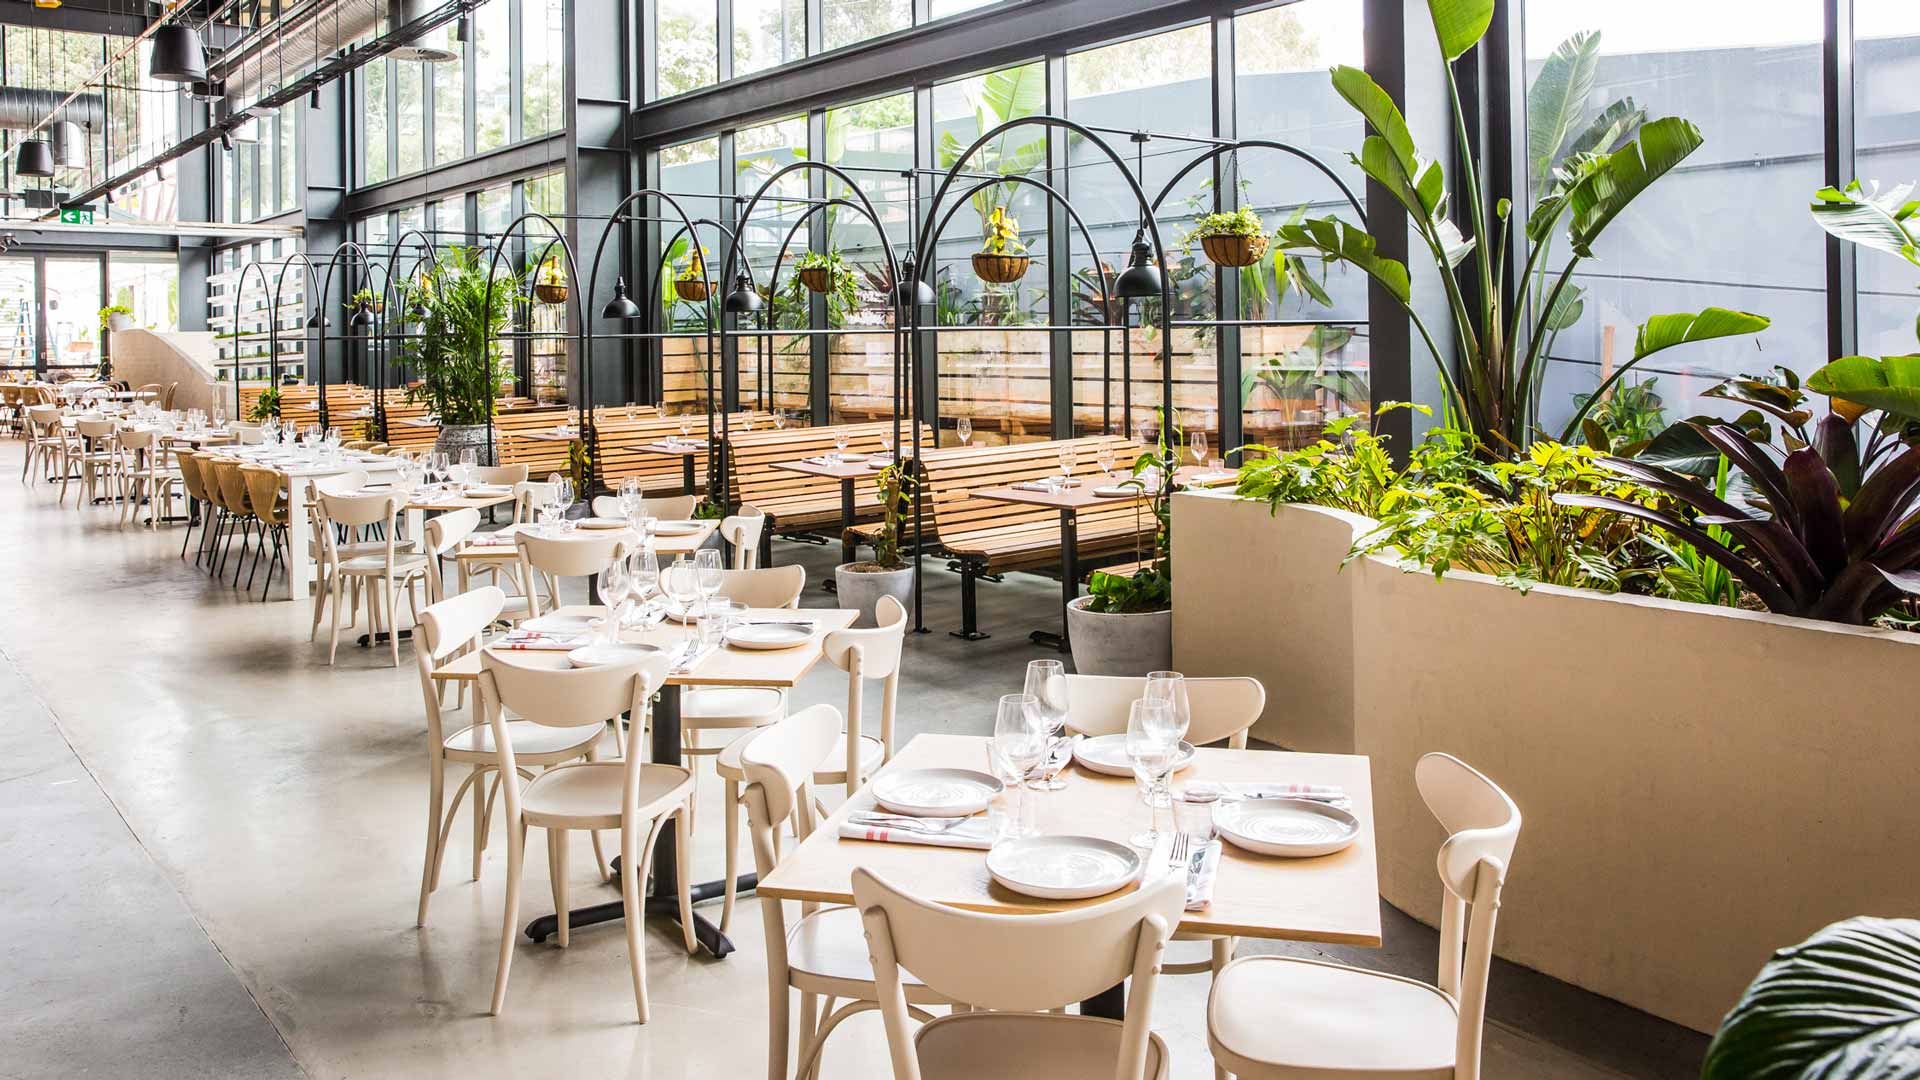 Acre Artarmon Is the Lower North Shore's Sprawling New Restaurant, Bakery and Urban Farm